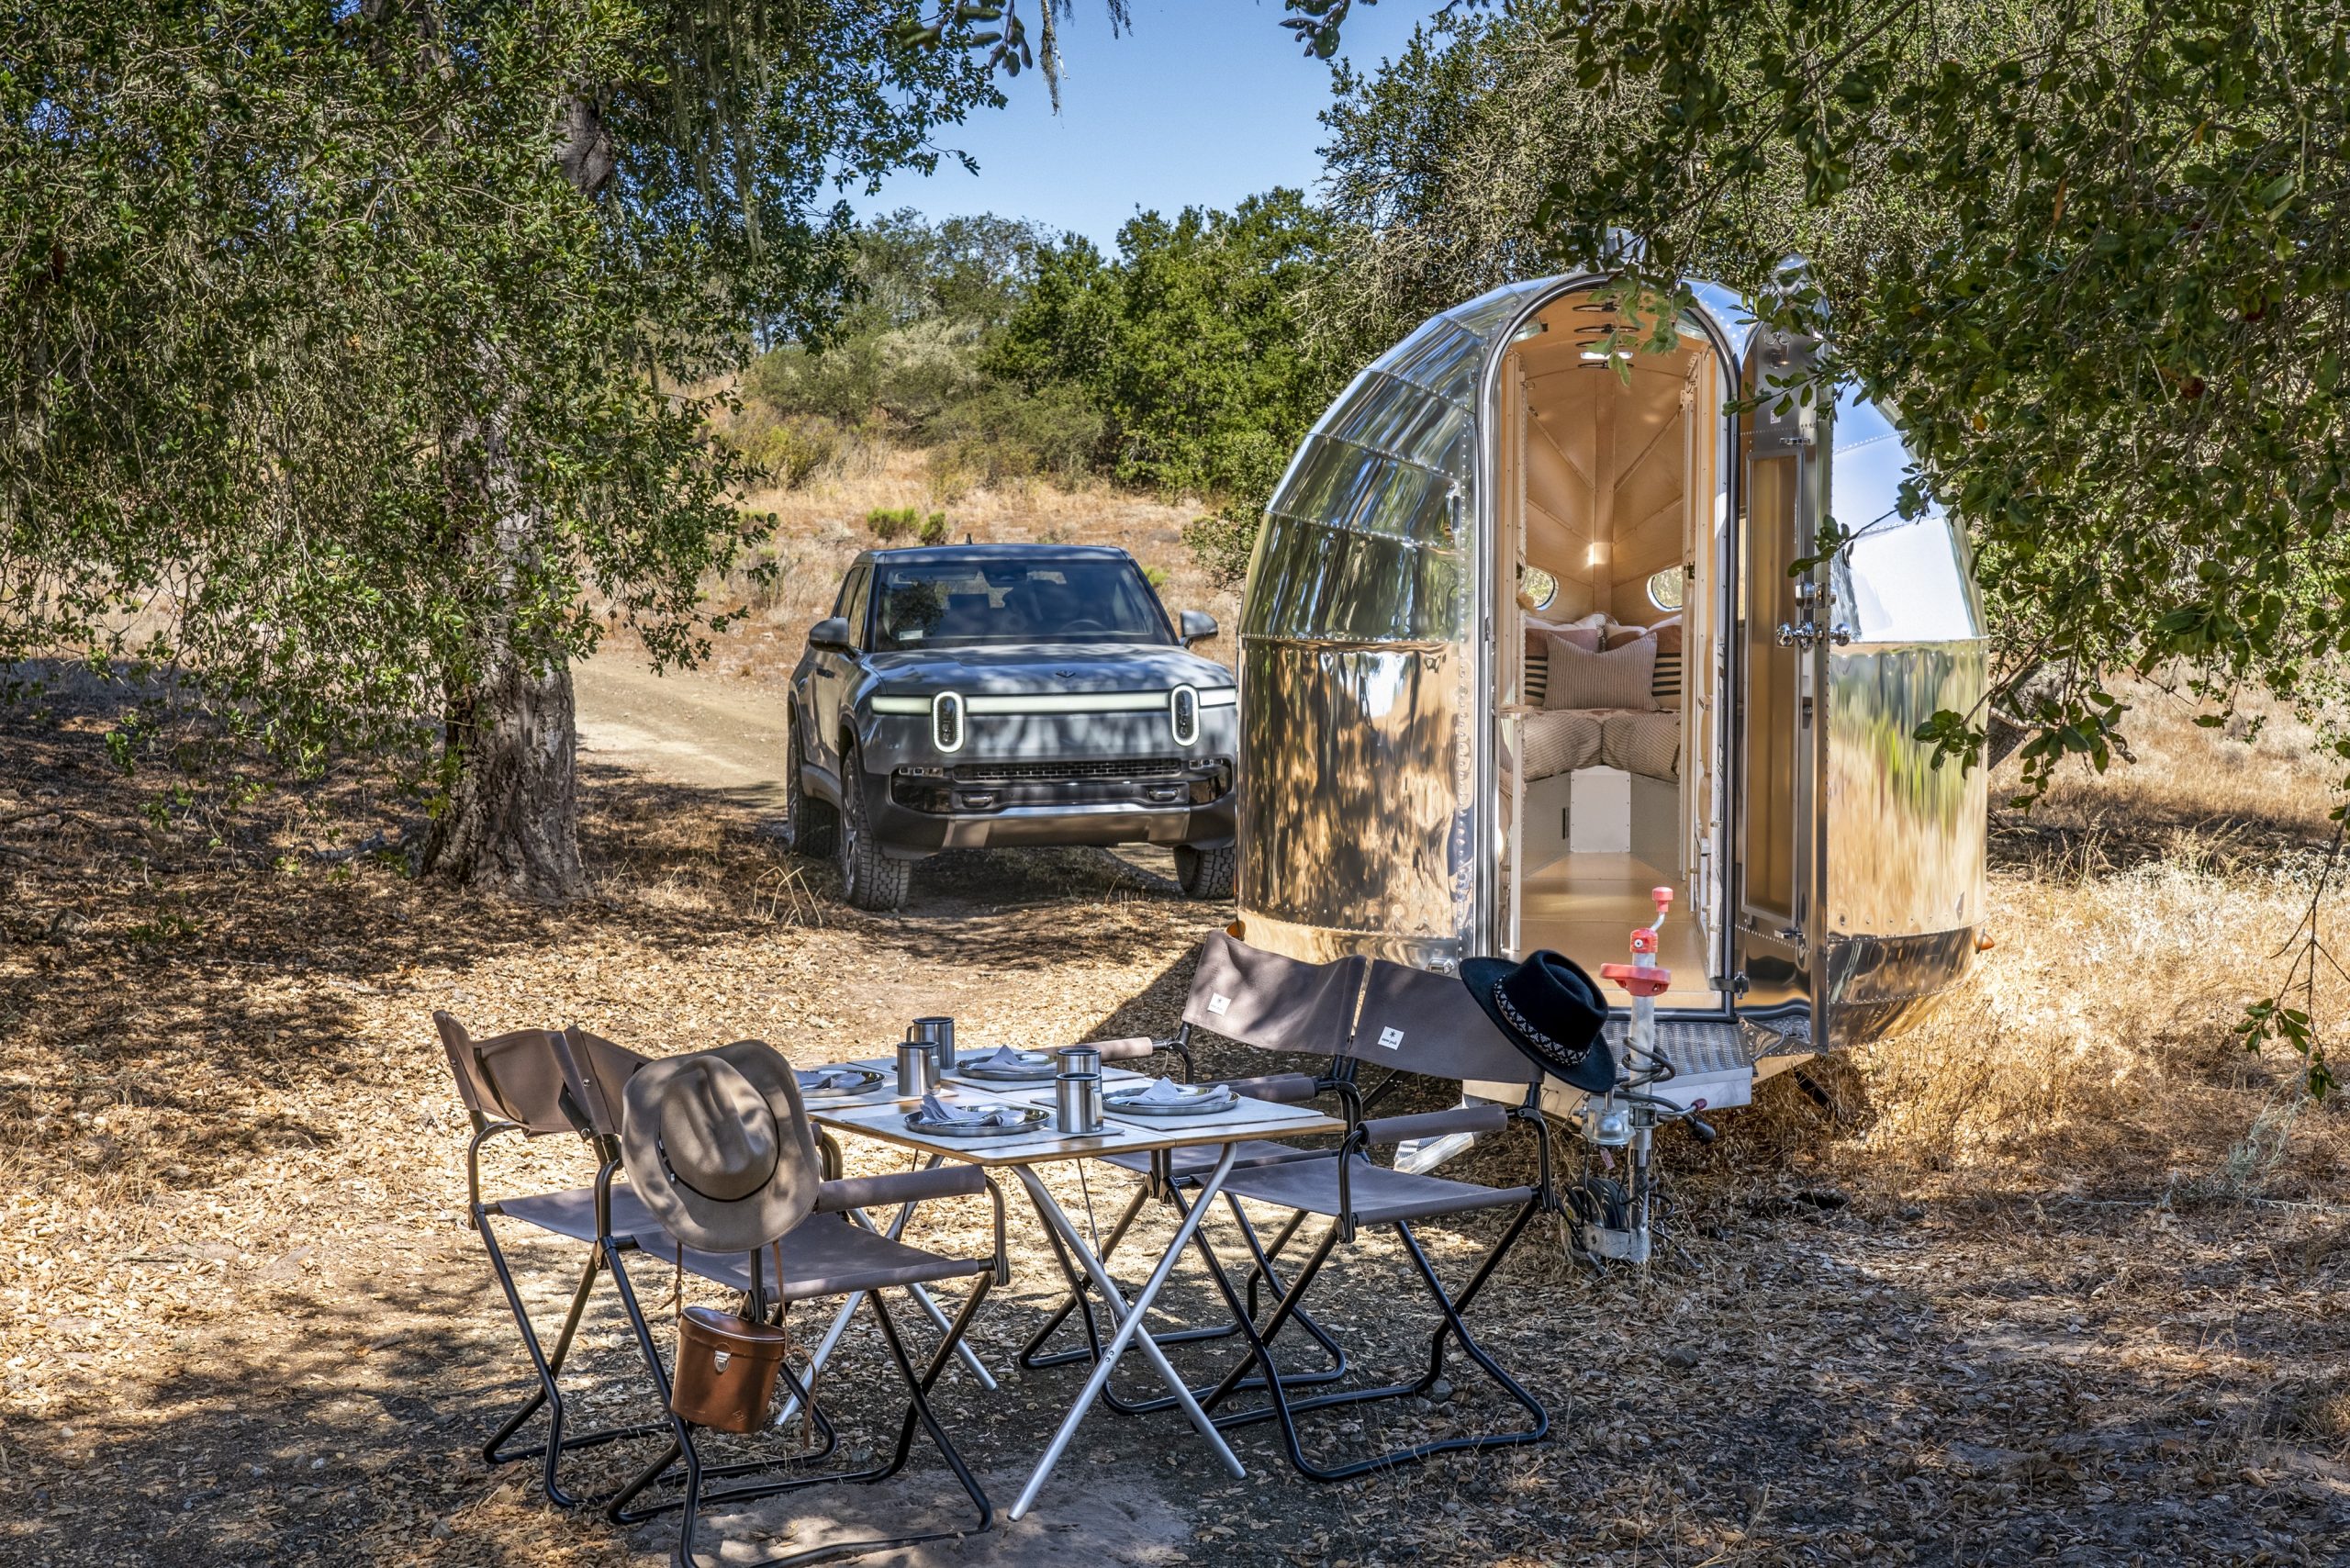 Why The Bowlus Volterra Electric Travel Trailer Makes More Sense Than An Electric Motorhome